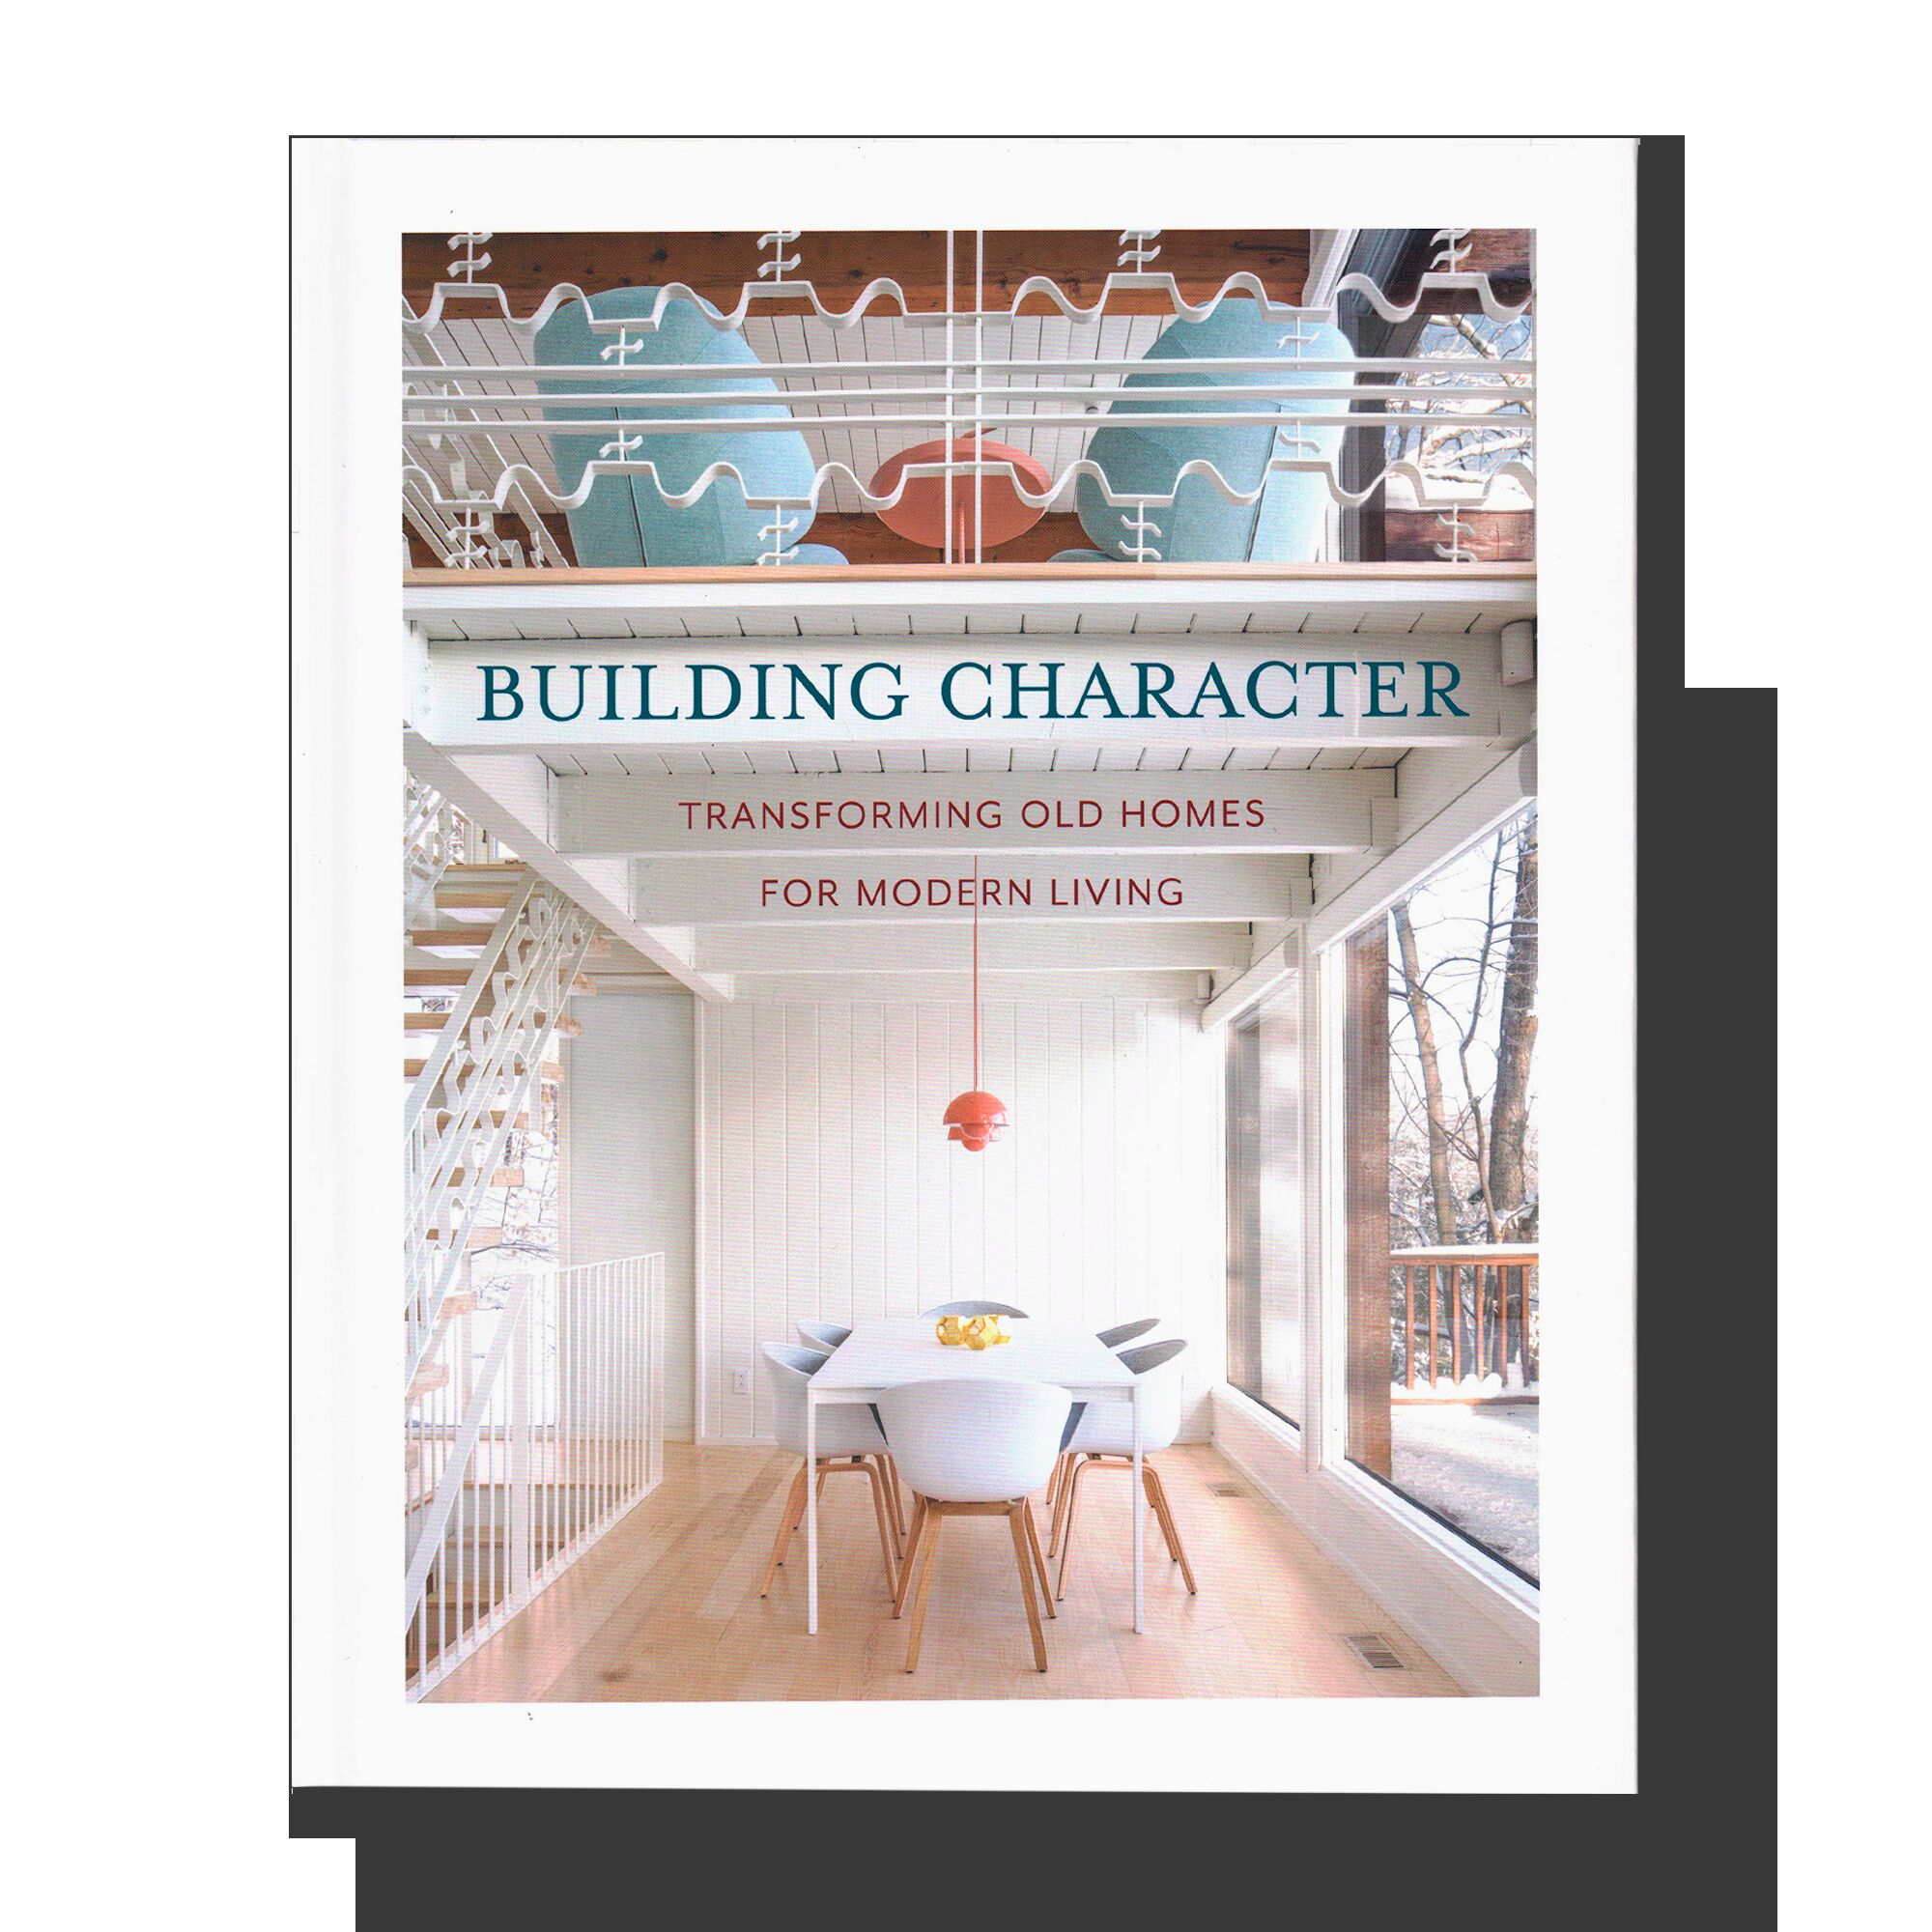 Building Character: Transforming Old Homes For Modern Living